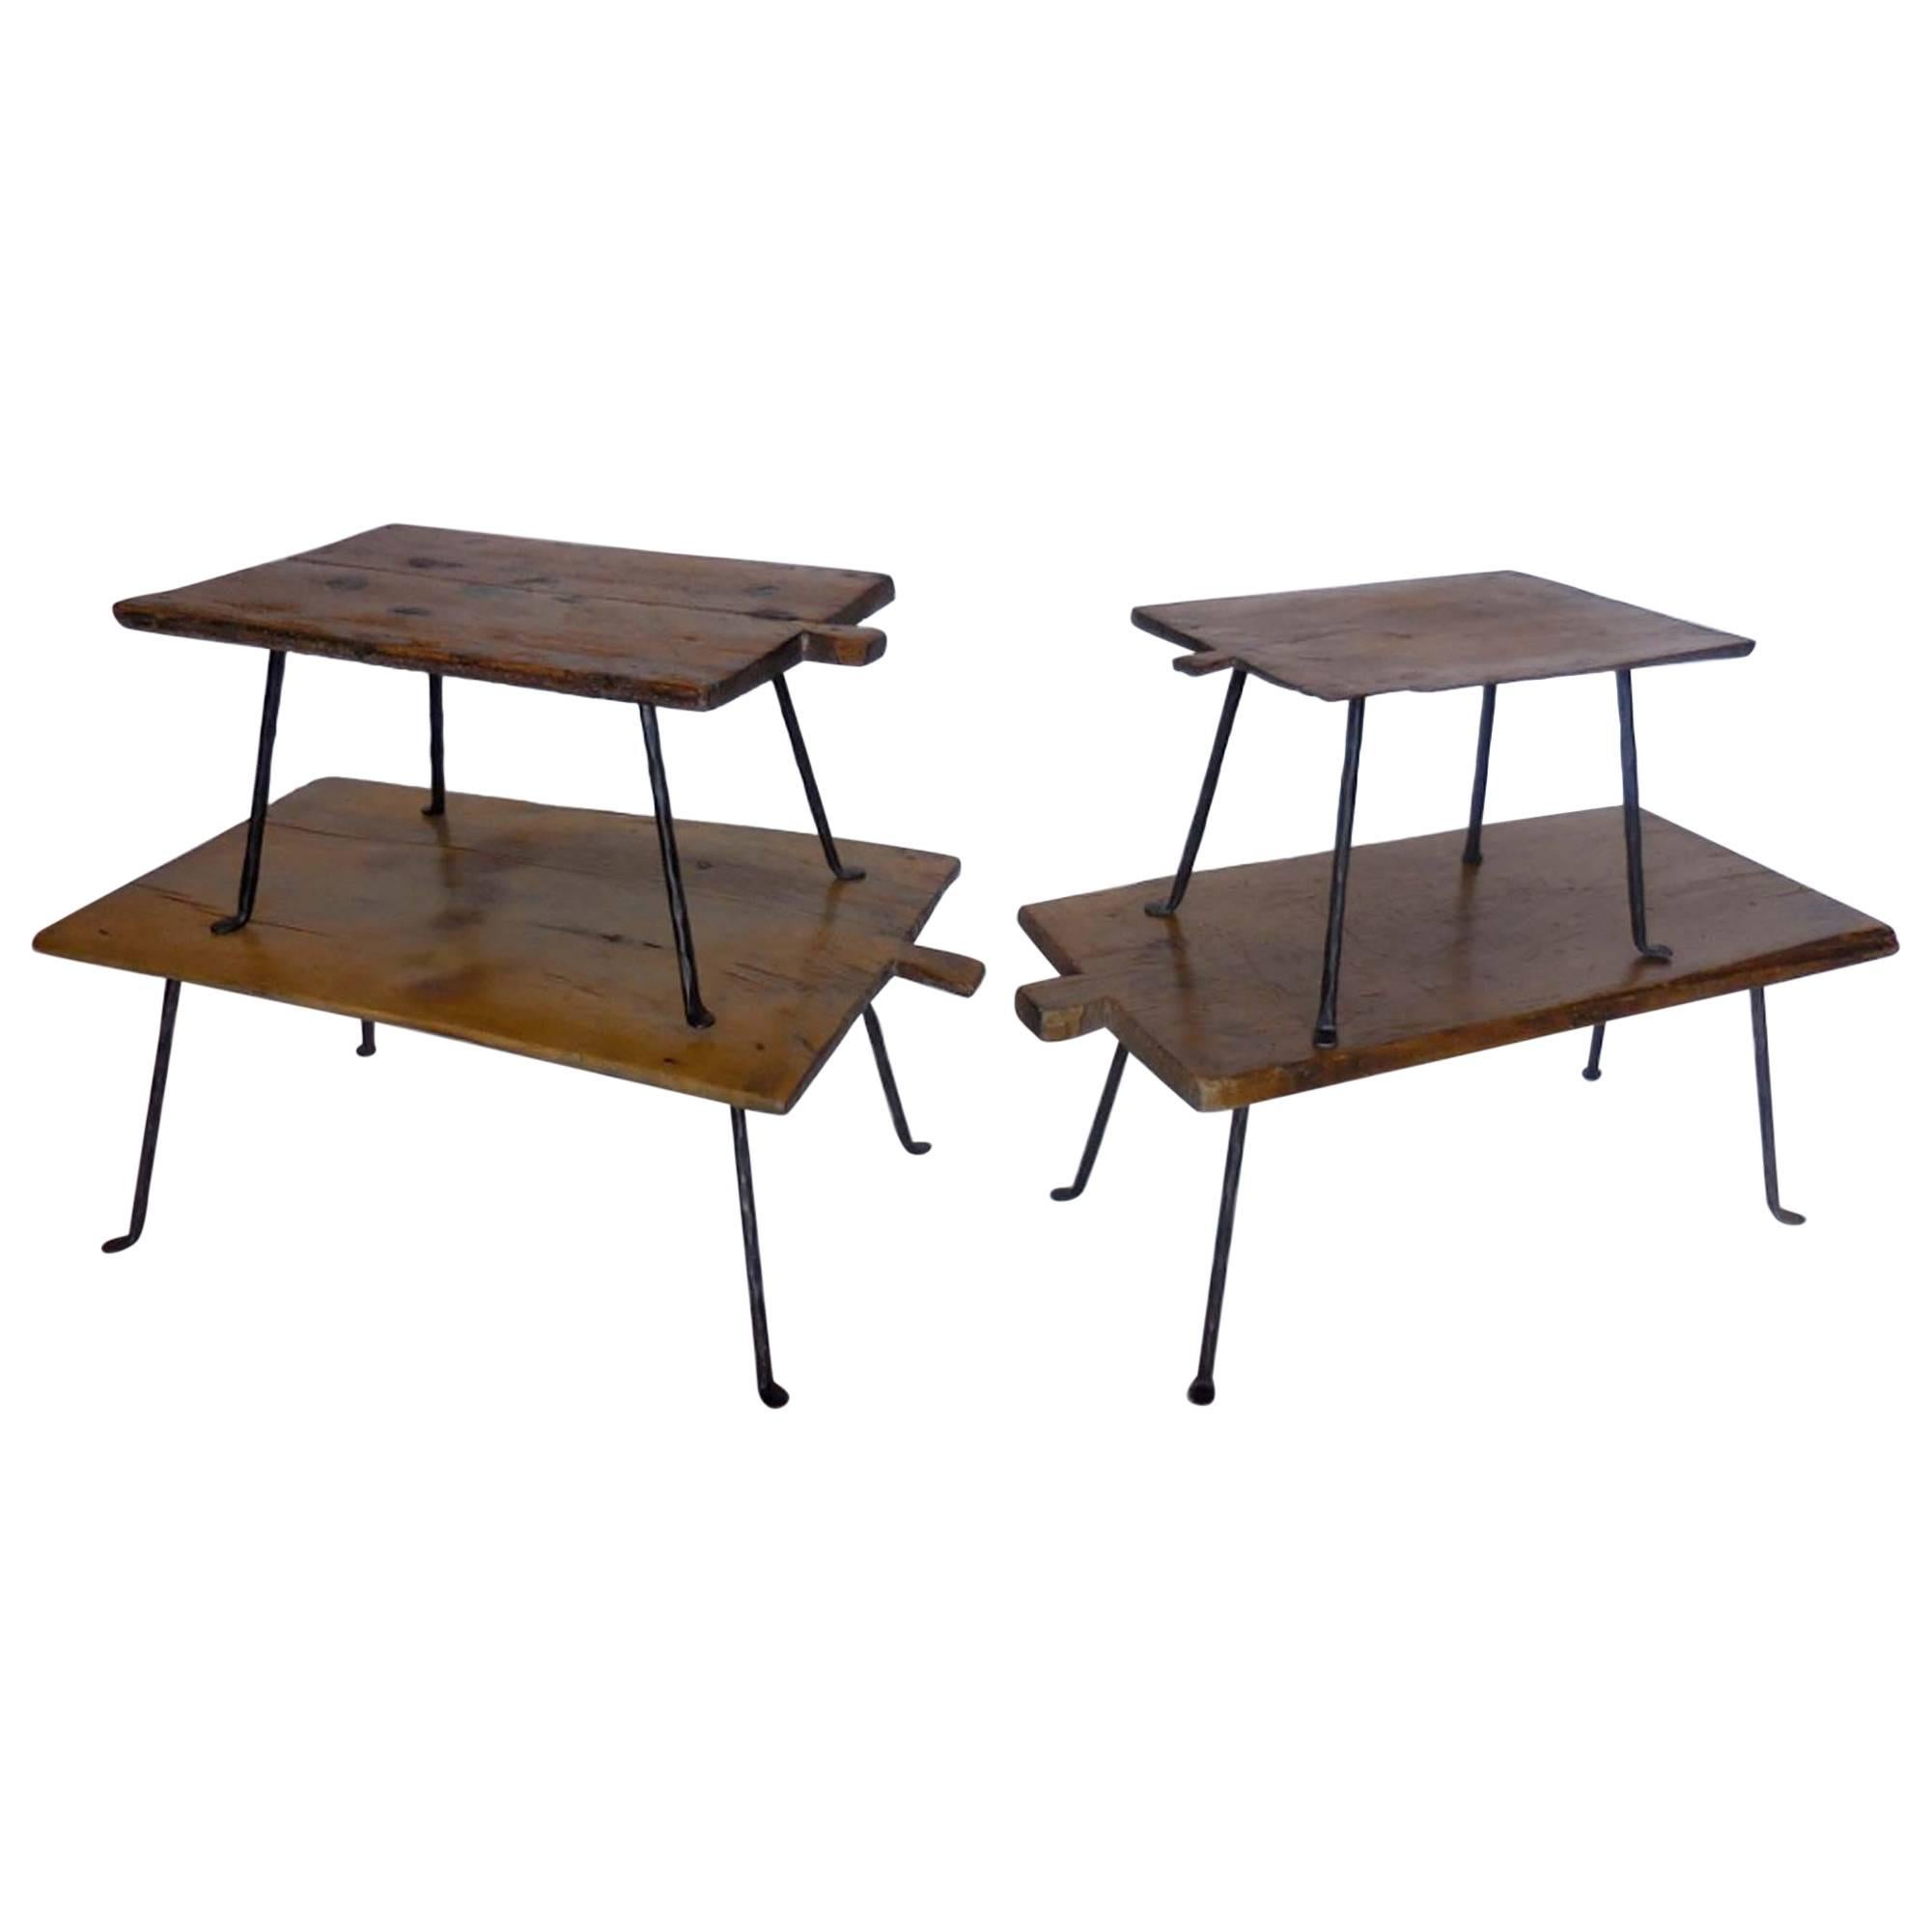 Set of Four Antique Wooden Small Tray Tables with Forged Iron Legs